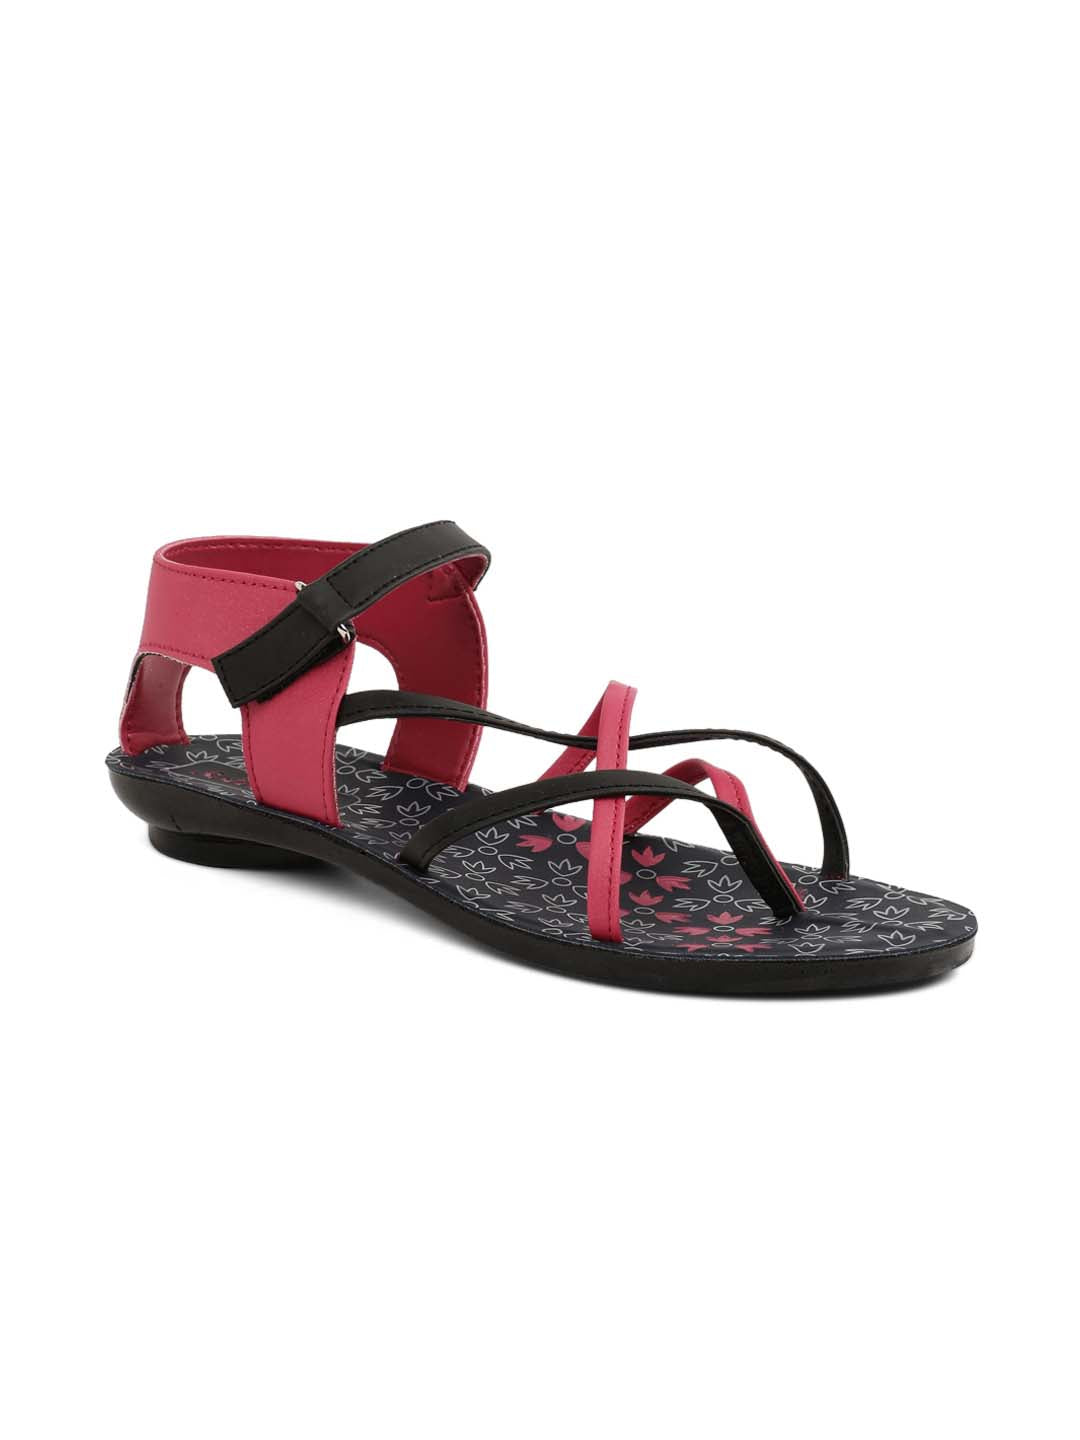 Paragon  PU7125L Women Sandals | Casual &amp; Formal Sandals | Stylish, Comfortable &amp; Durable | For Daily &amp; Occasion Wear